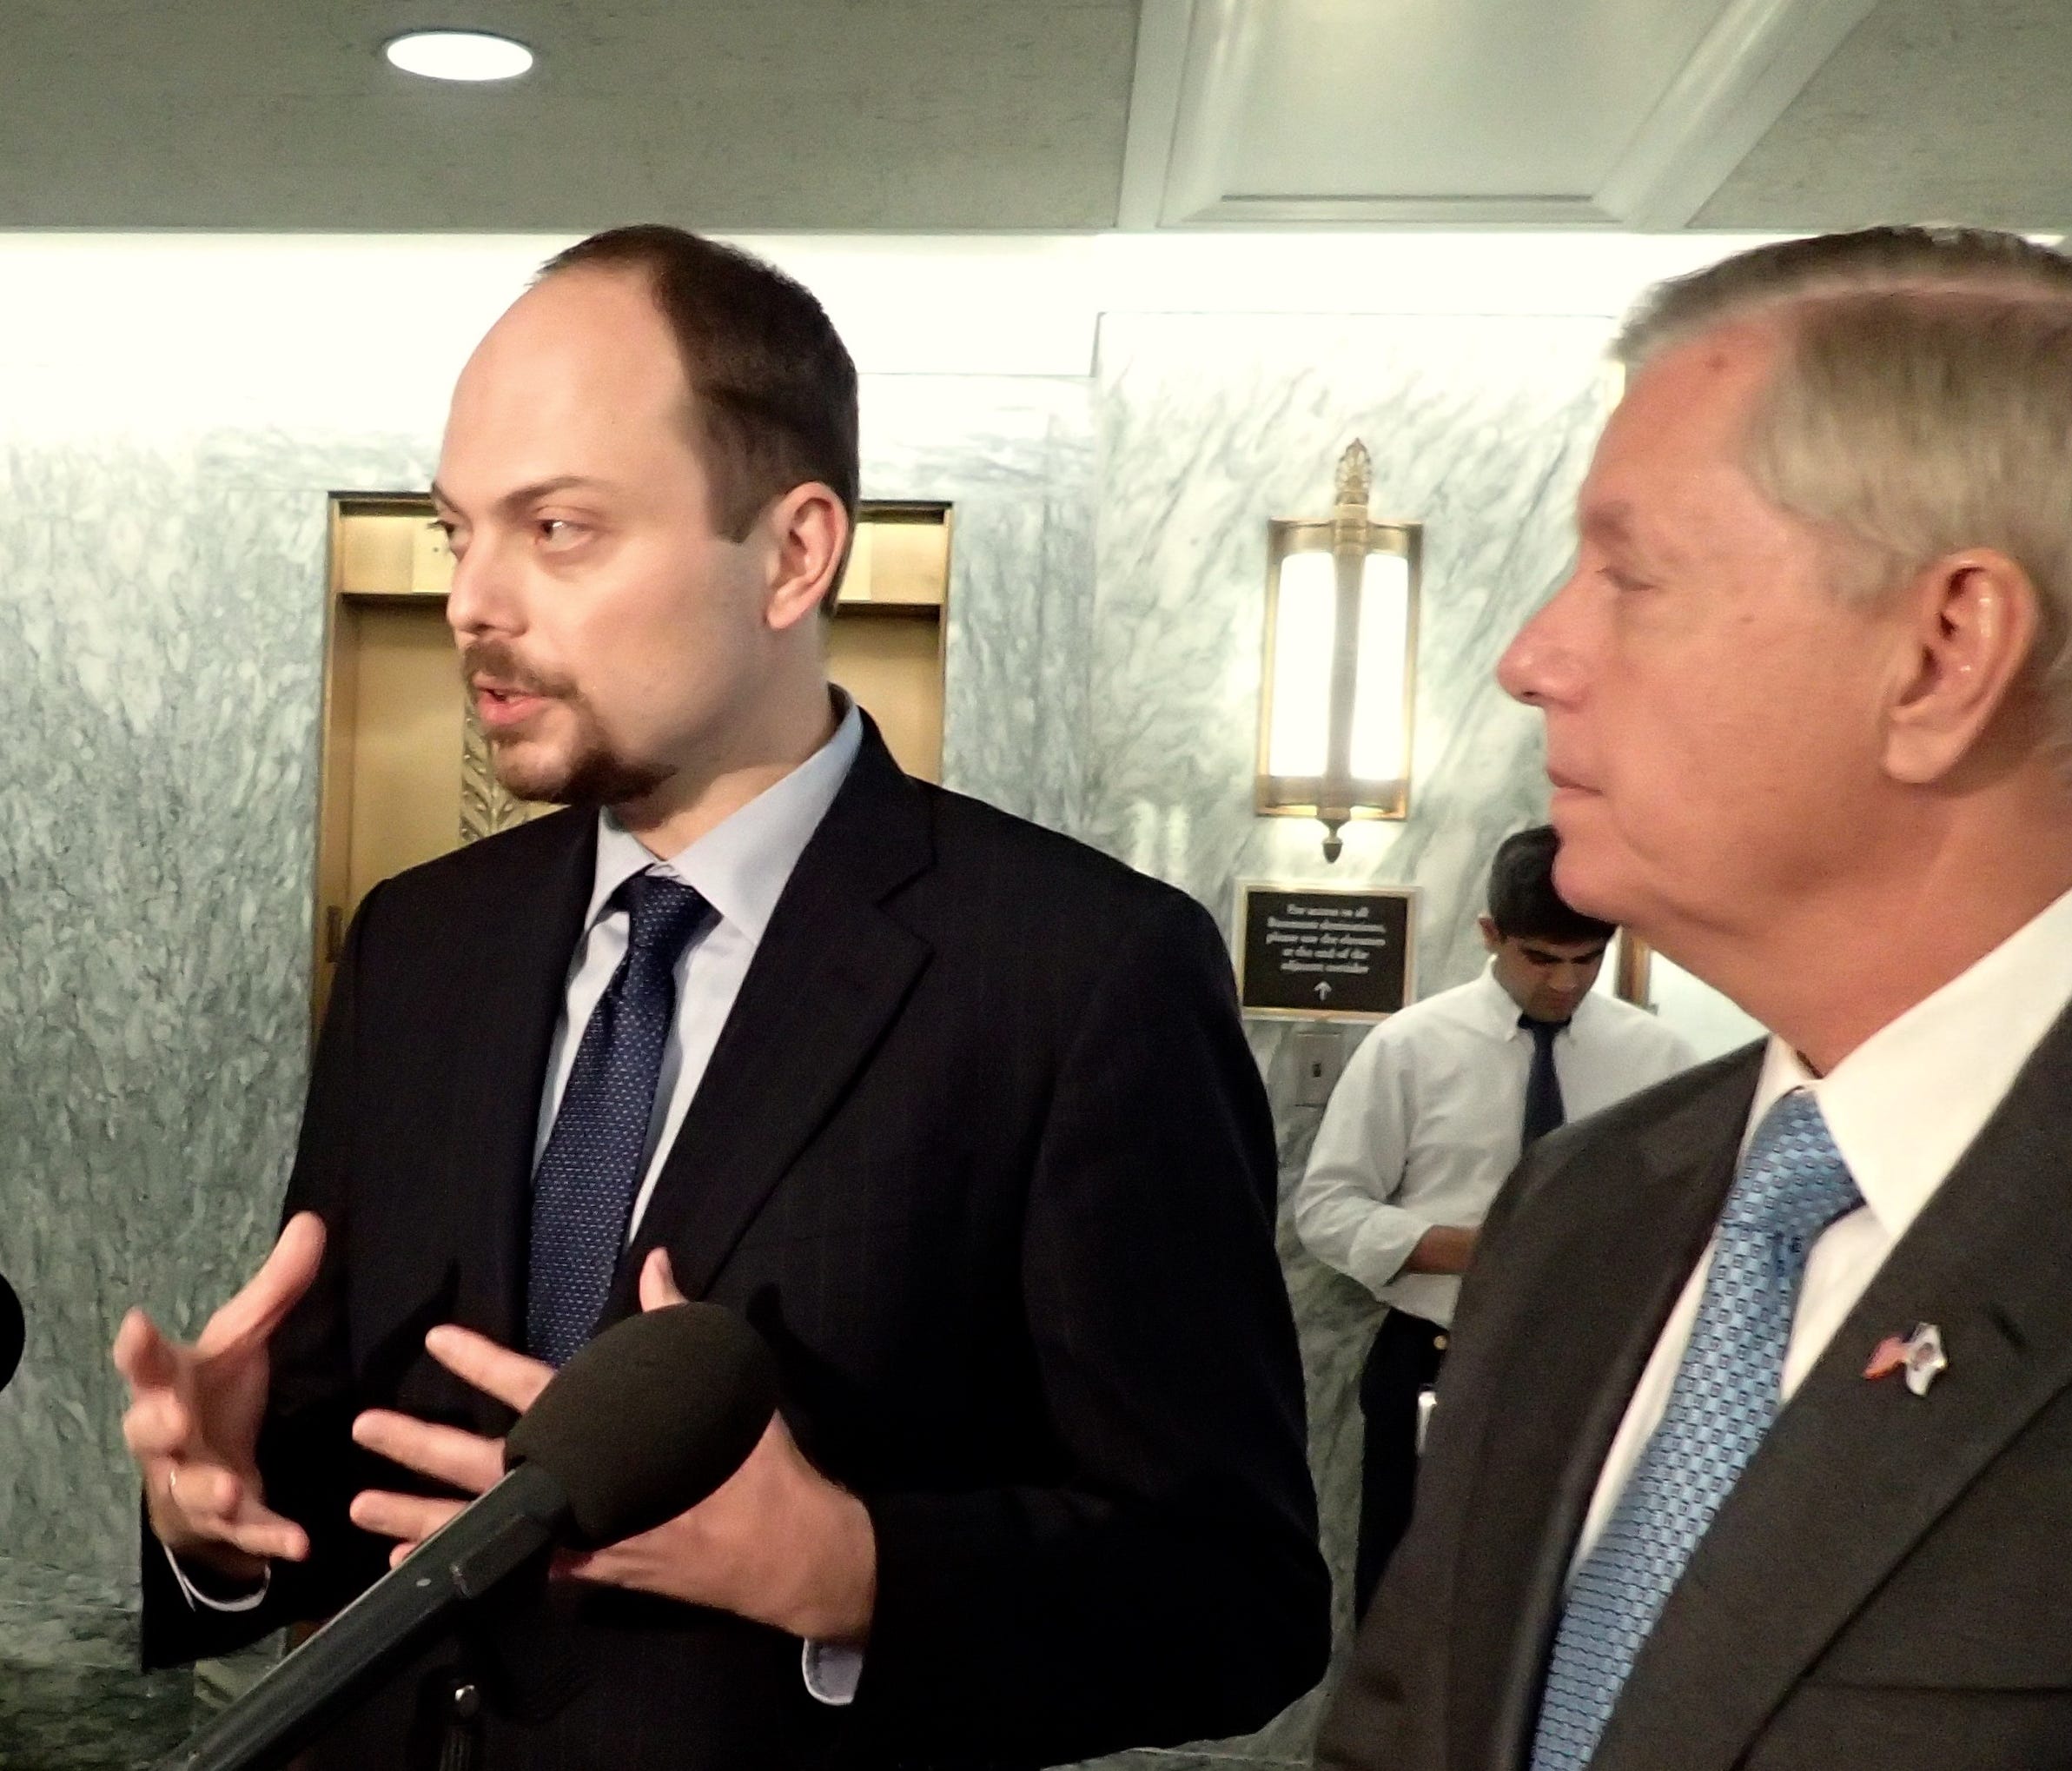 Russian activist Vladimir Kara-Murza talks to reporter on Capitol Hill with Sen. Lindsey Graham, R-S.C., about official corruption and political intimidation in Vladimir Putin's Russia, March 29, 2017.